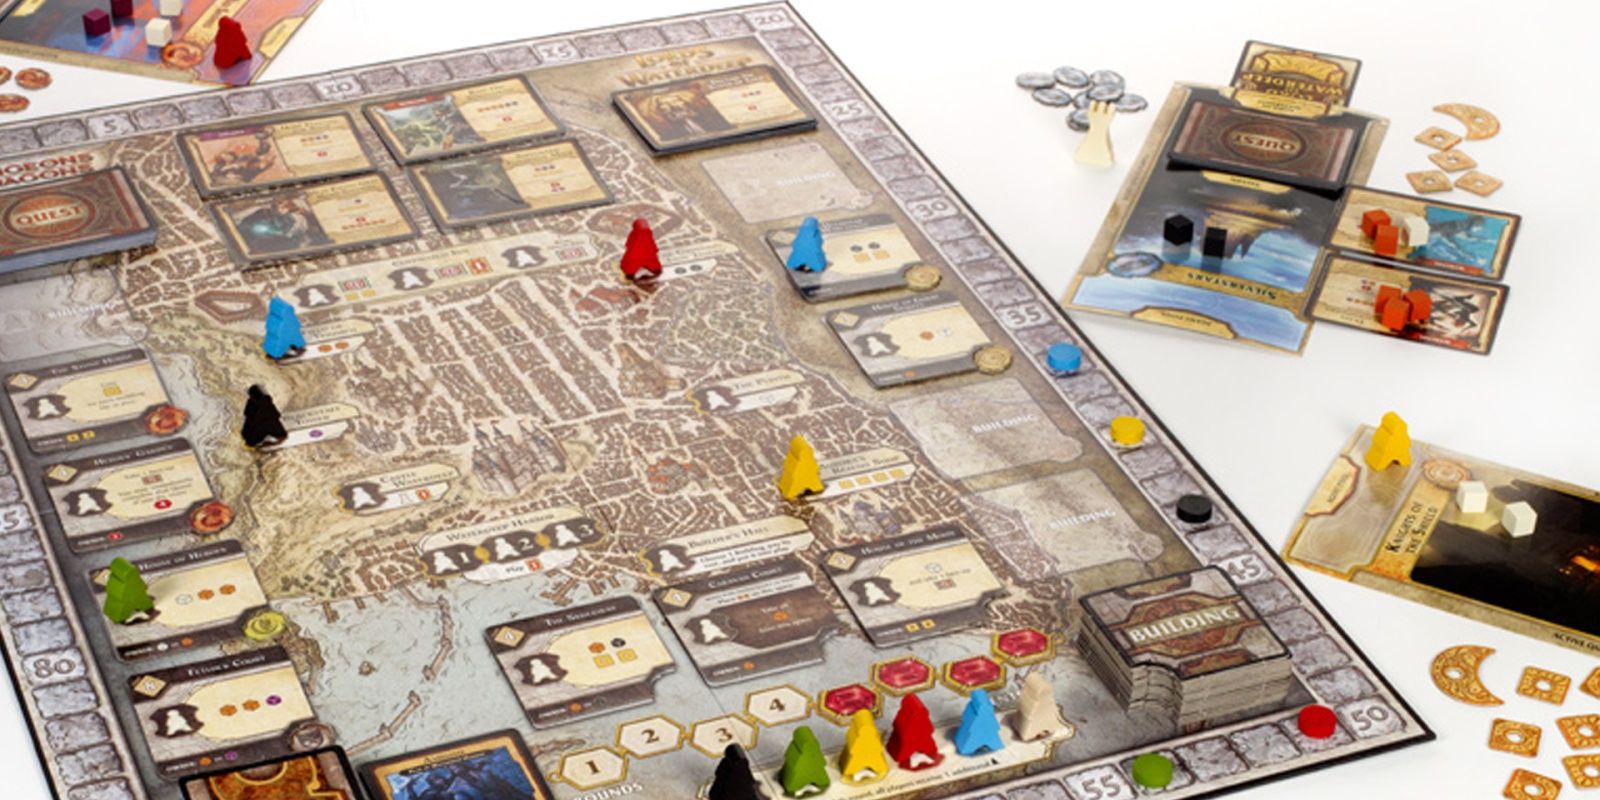 Several players competing in Lords of Waterdeep DnD board game